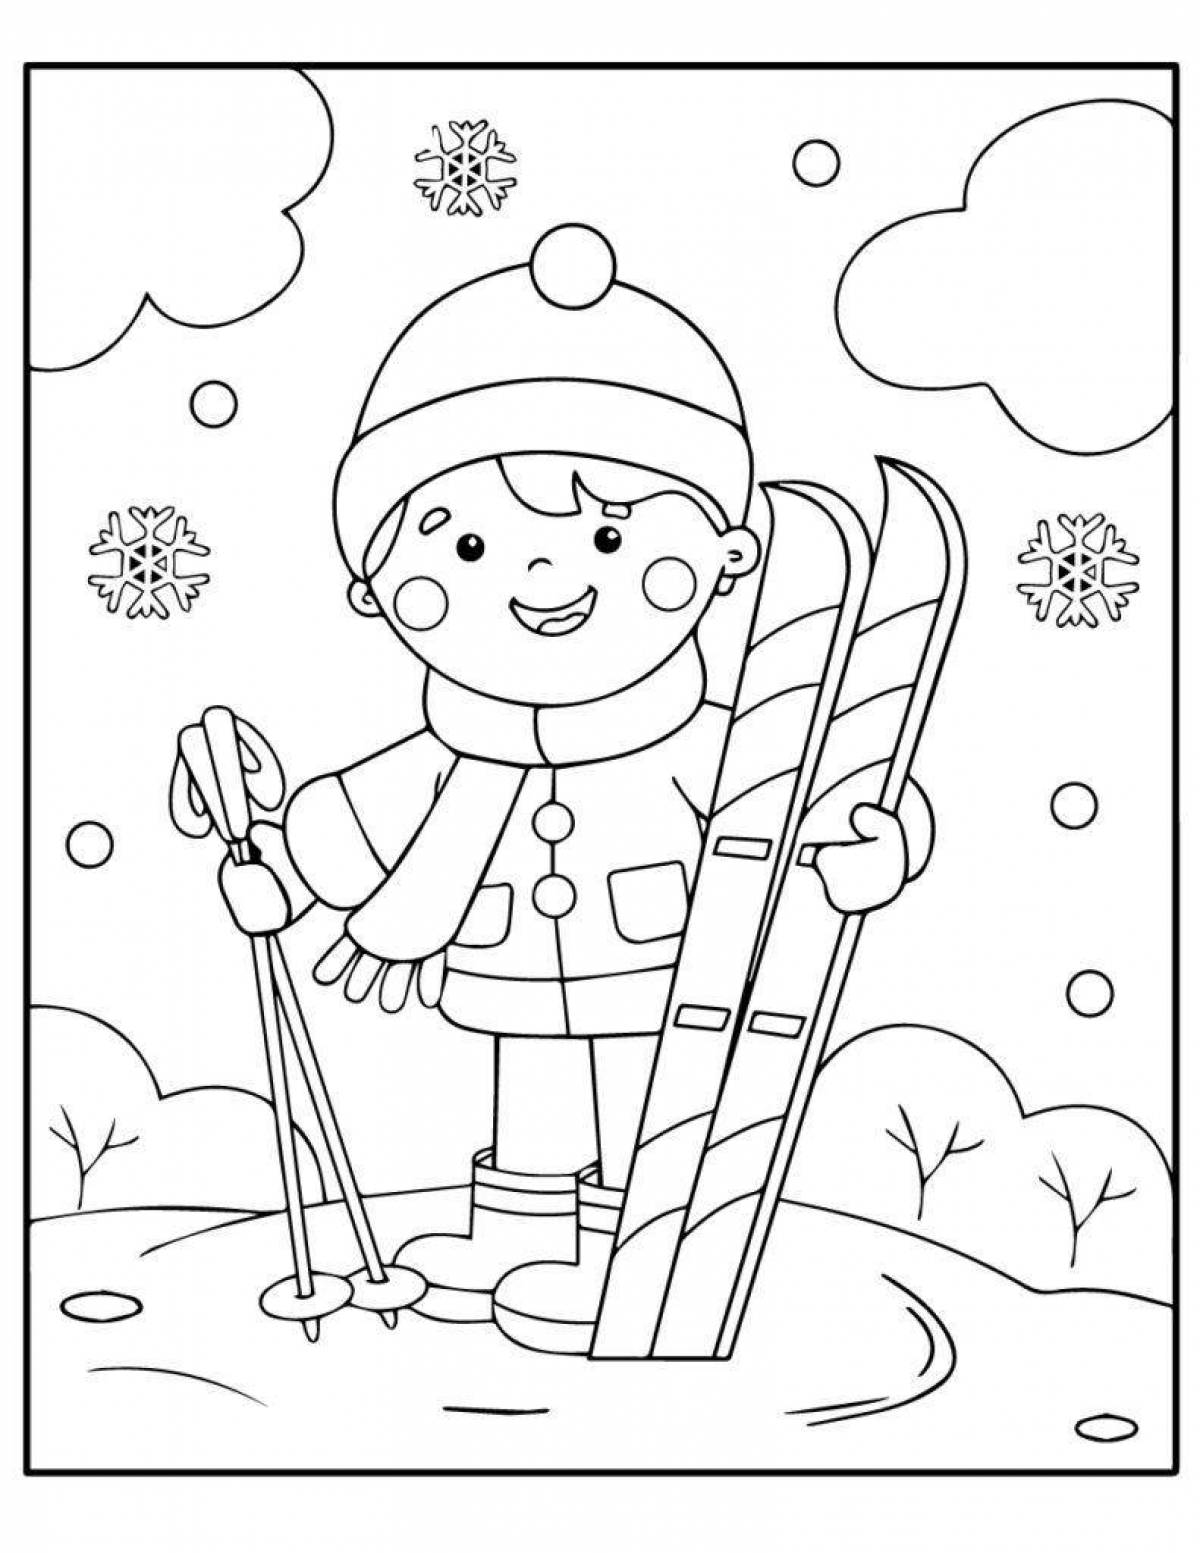 Vibrant winter sports coloring pages for preschoolers